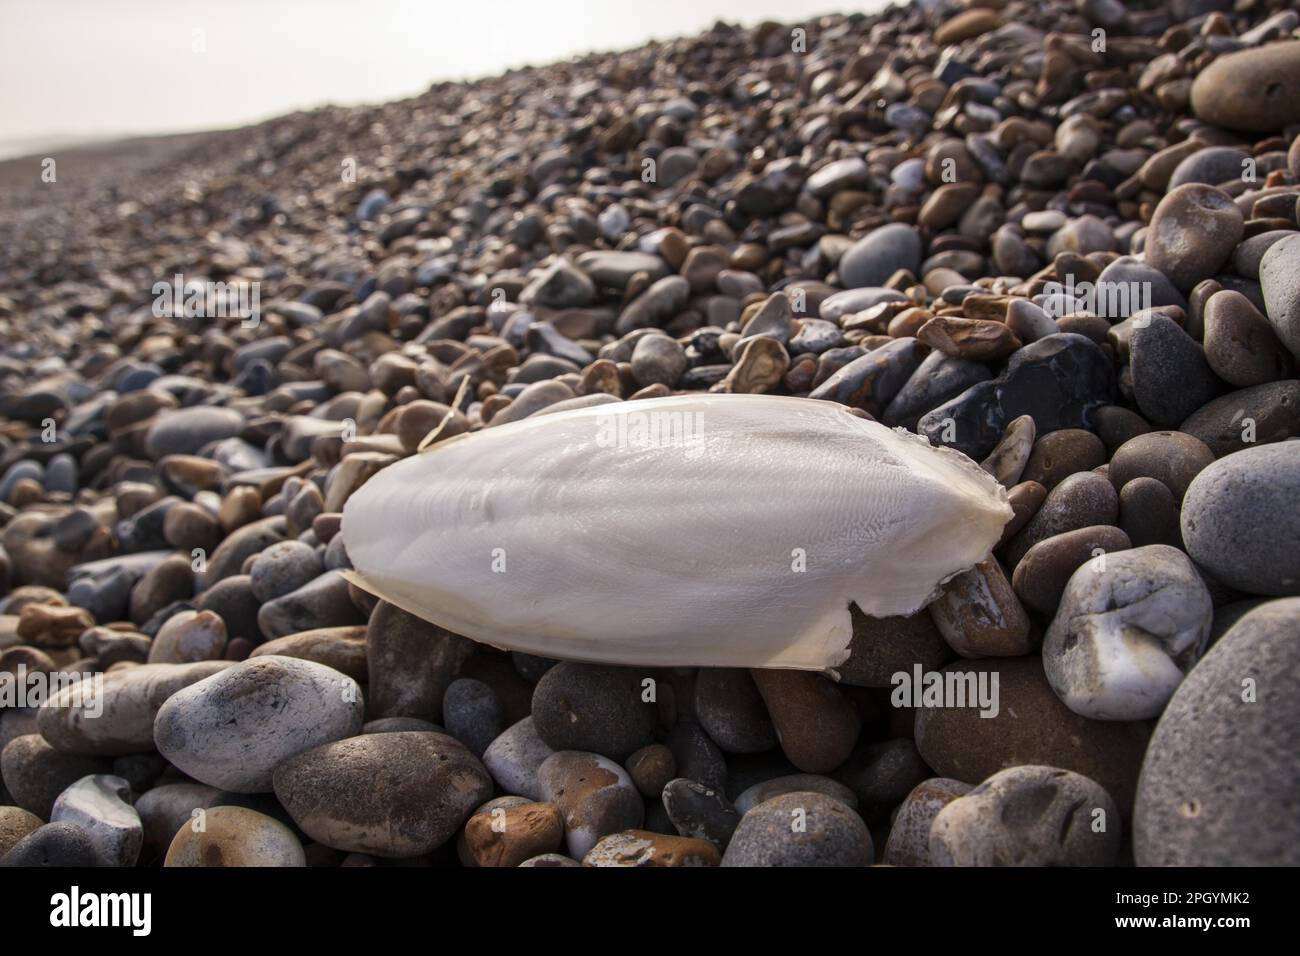 Common cuttlefish (Sepia officinalis), Common squid, Other animals, Cephalopods, Animals, Molluscs, Common Cuttlefish cuttlebone, washed up on a Stock Photo